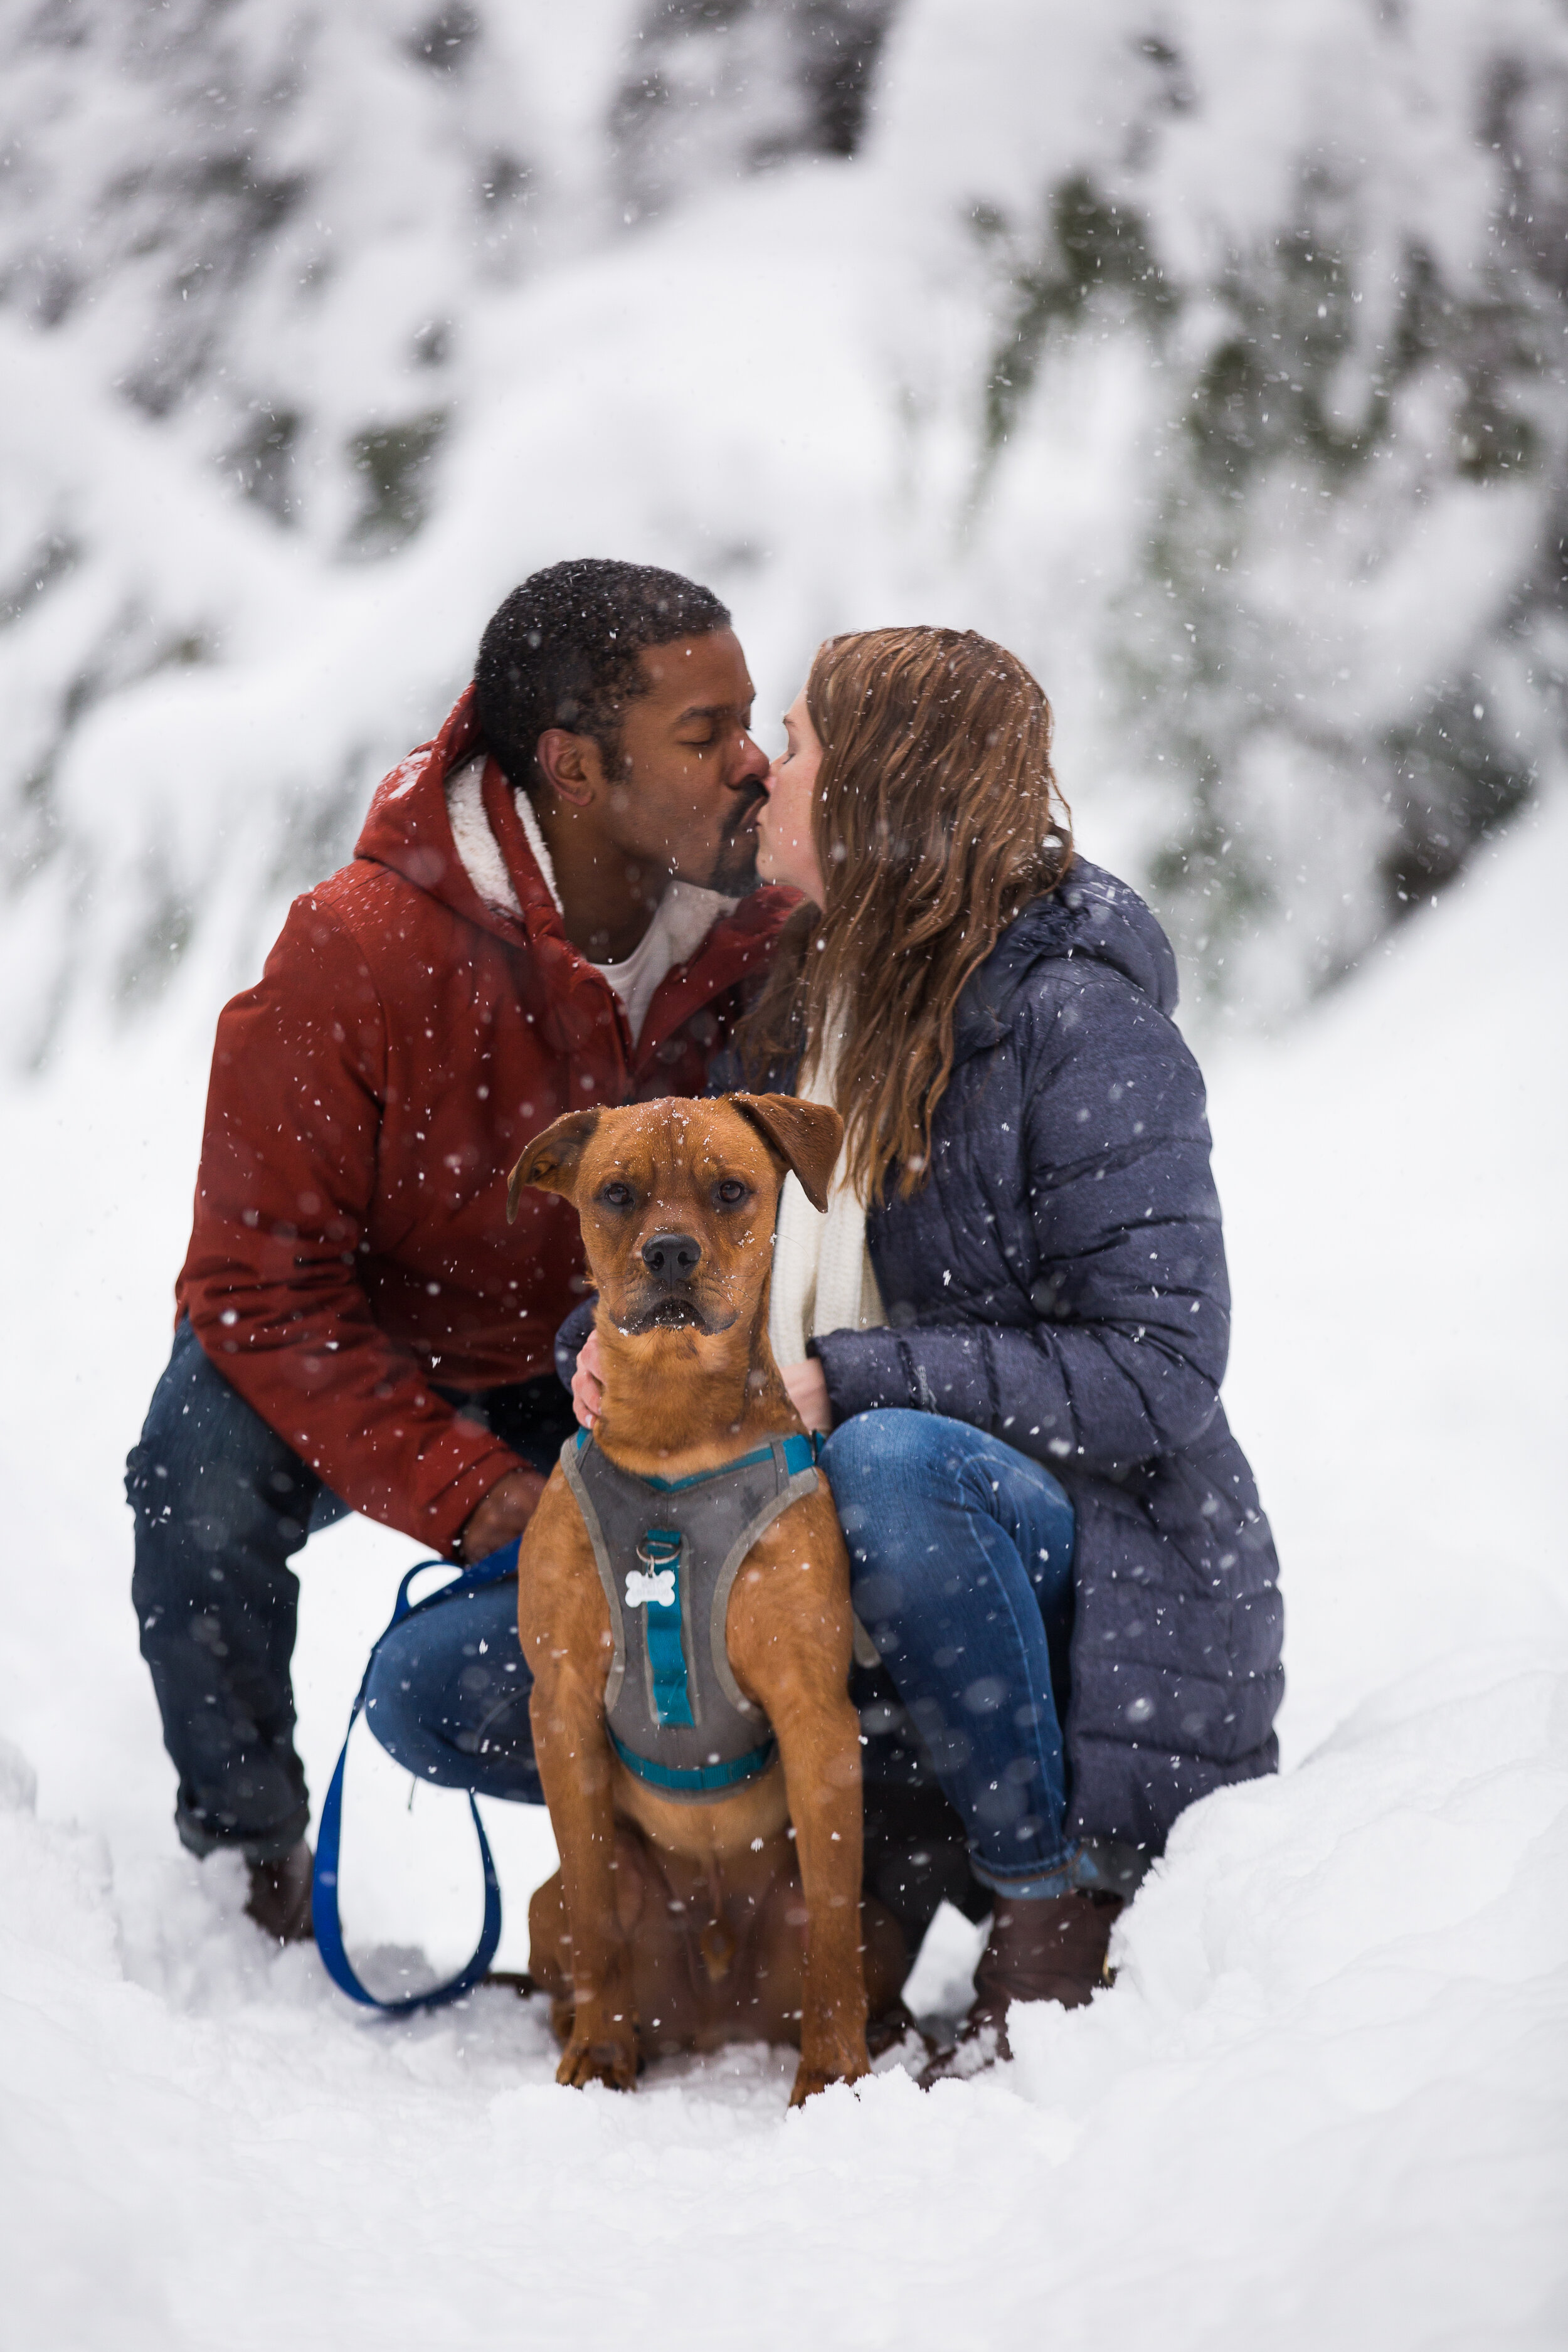 Emily Hall Photography - Snow Engagement Pictures-3538.jpg